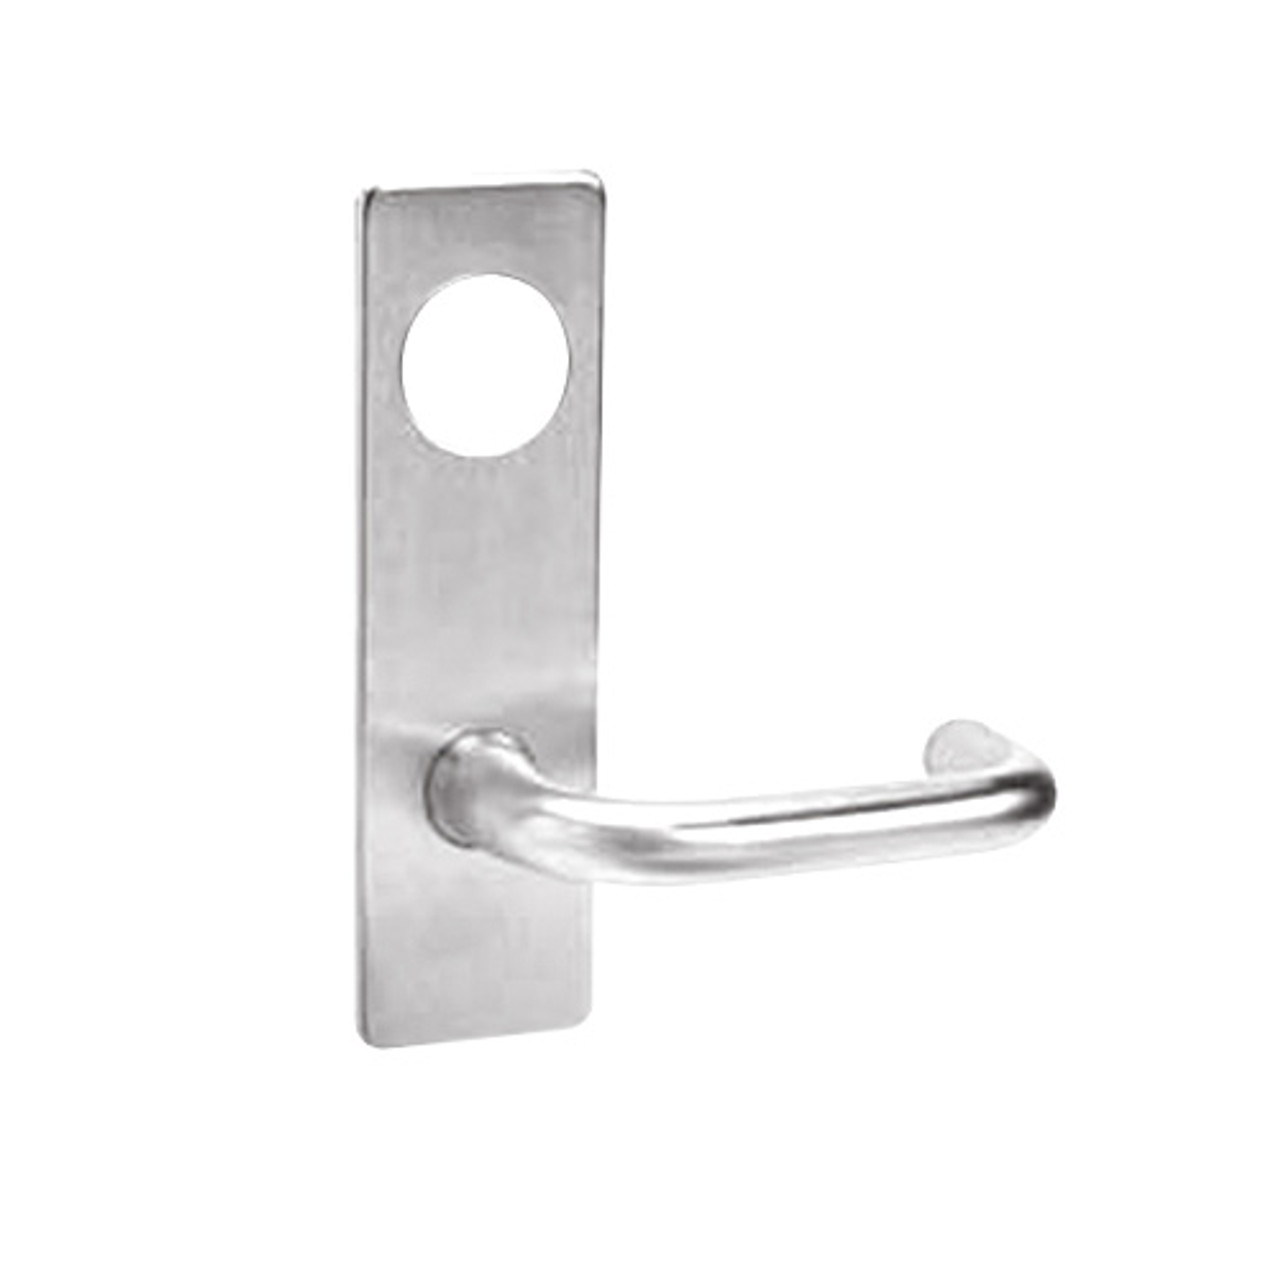 ML2022-LWP-629-M31 Corbin Russwin ML2000 Series Mortise Store Door Trim Pack with Lustra Lever with Deadbolt in Bright Stainless Steel